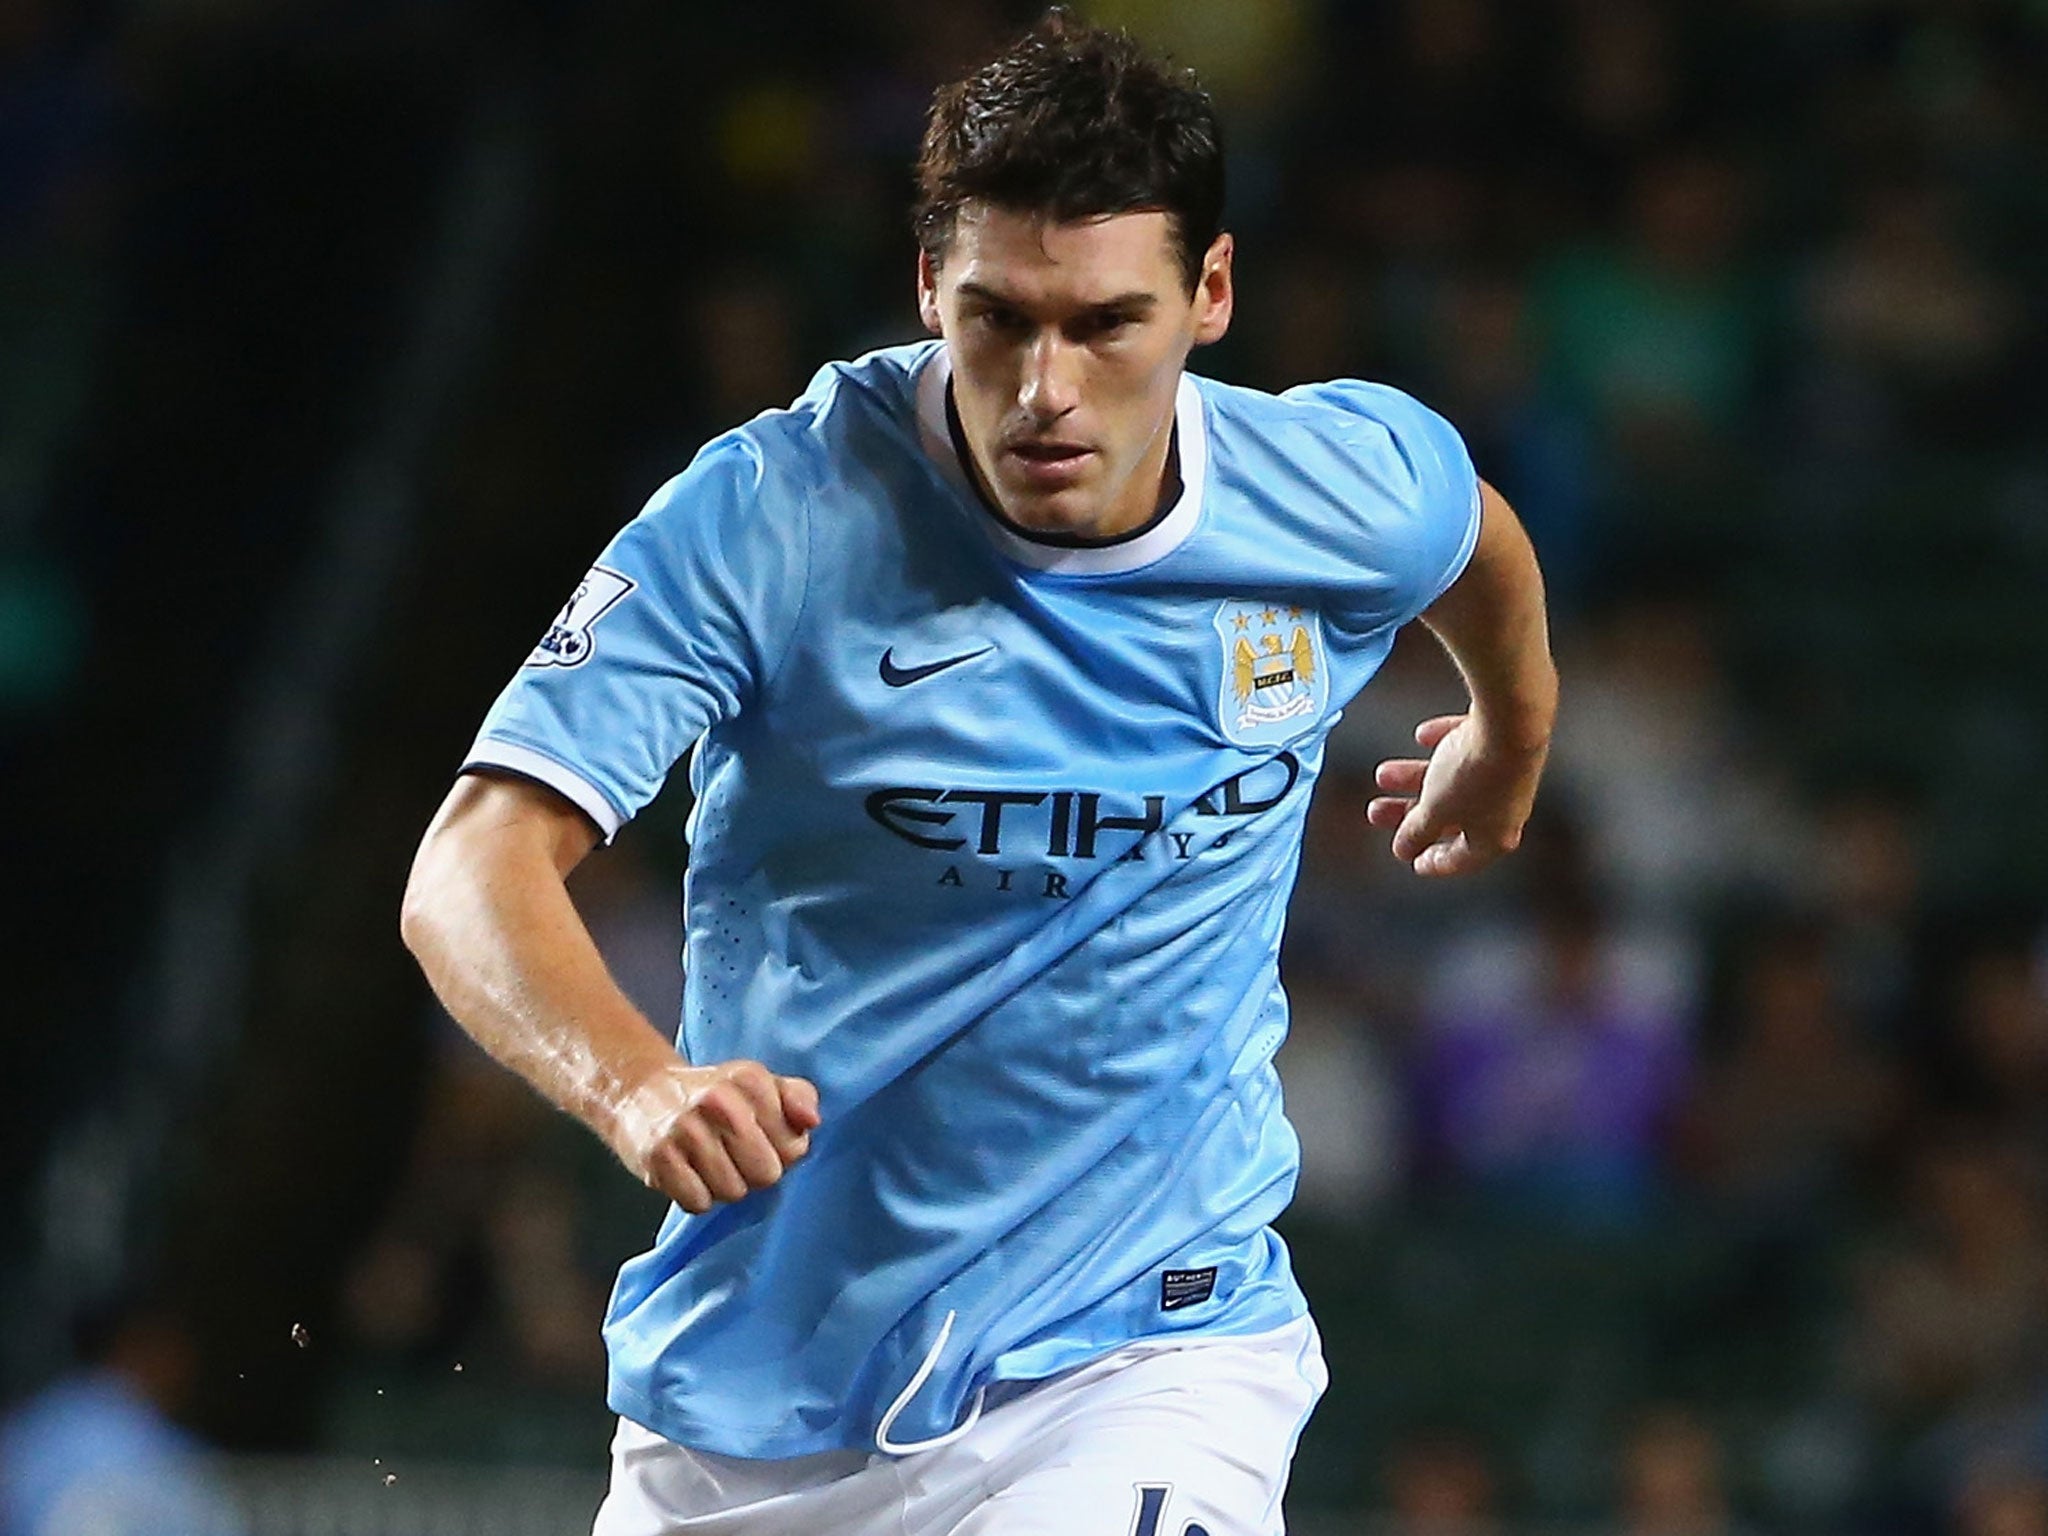 Gareth Barry will be allowed to leave Manchester City